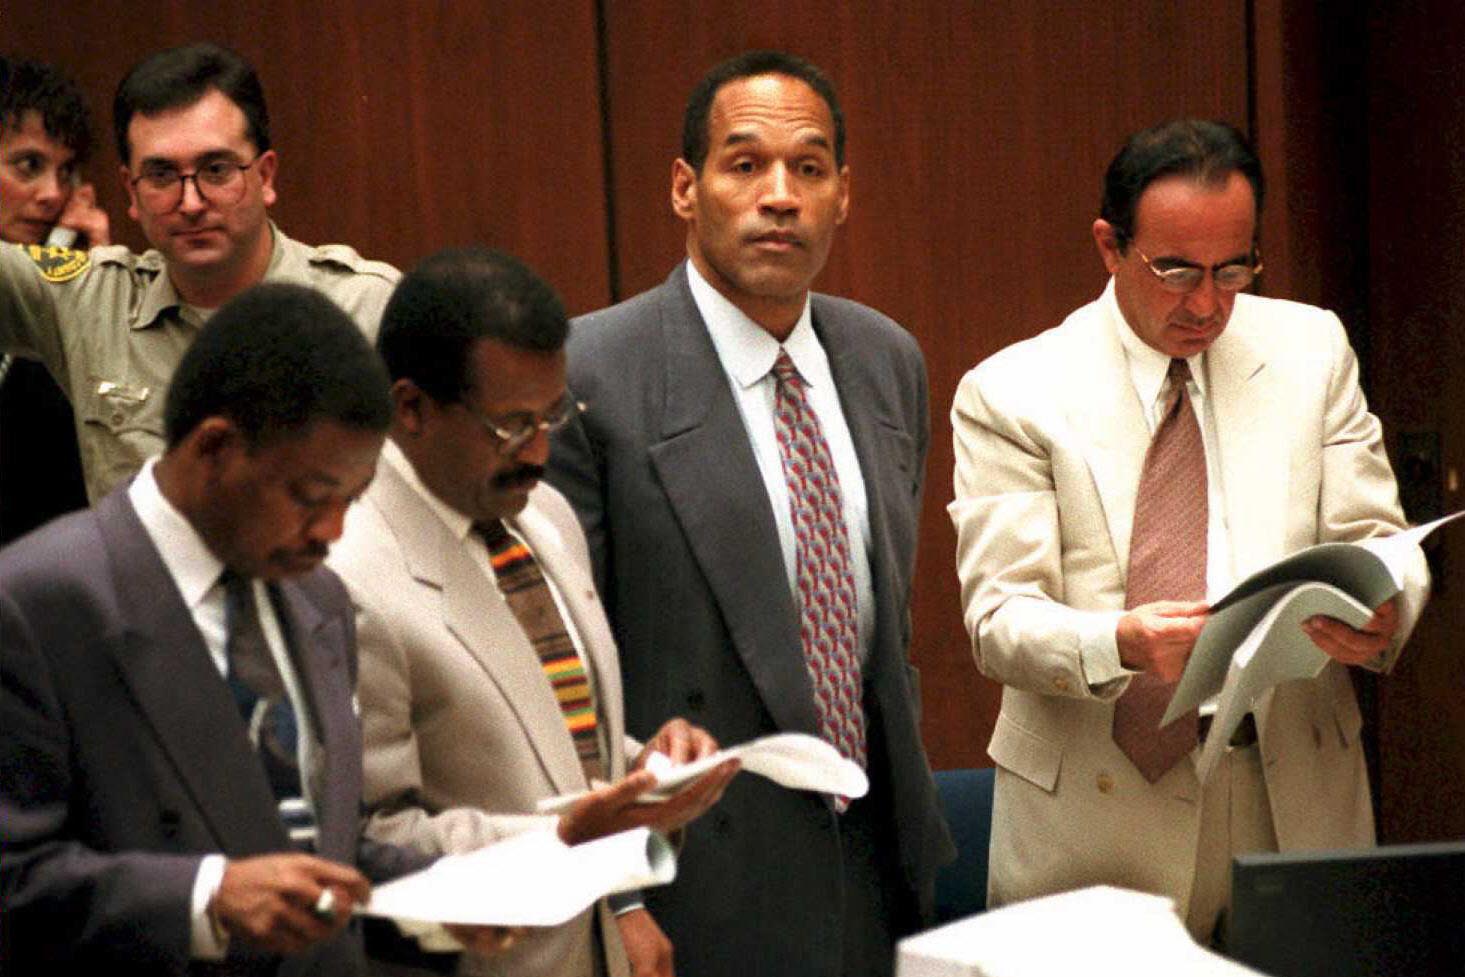 'O.J. Simpson watches as the jury in his double-murder trial enters the courtroom in the afternoon.' 02 February. (L): Carl Douglas, Johnnie Cochran Jr., Simpson, and Robert Shapiro. Murder victim Nicole Brown-Simpson's sister Denise Brown will testify. Getty Images.